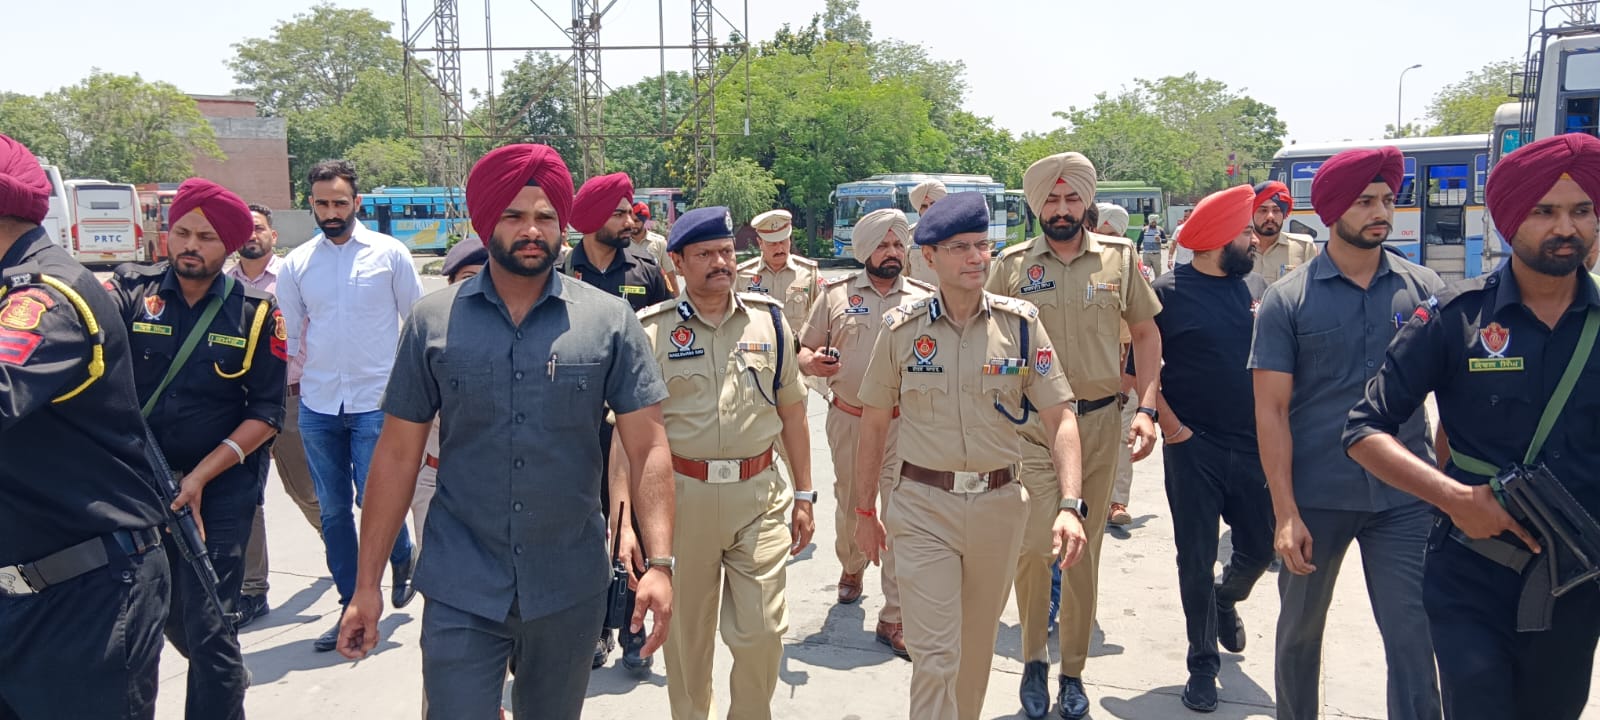 AFTER TWO BLASTS NEAR GOLDEN TEMPLE, PUNJAB POLICE LAUNCH STATEWIDE CHECKING DRIVE